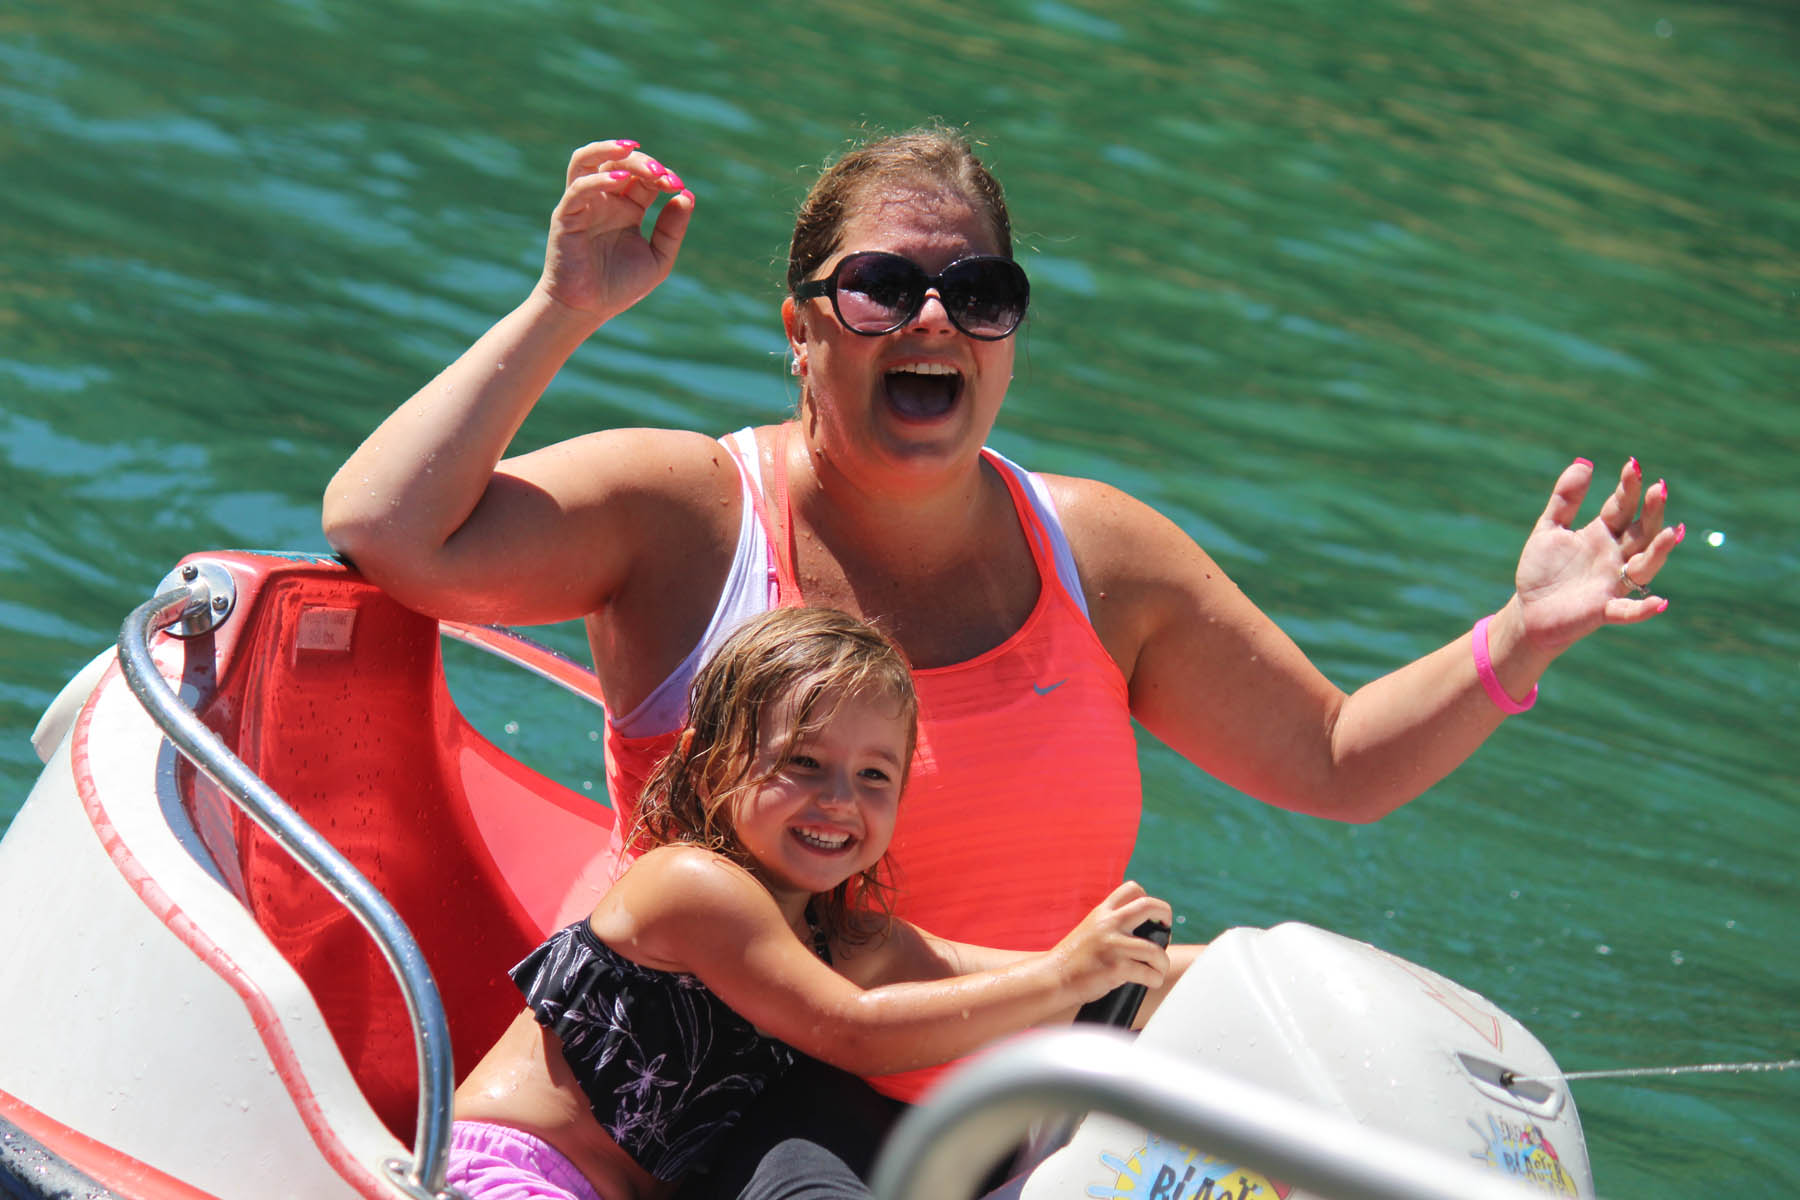 Mother and daughter in bumper boat.